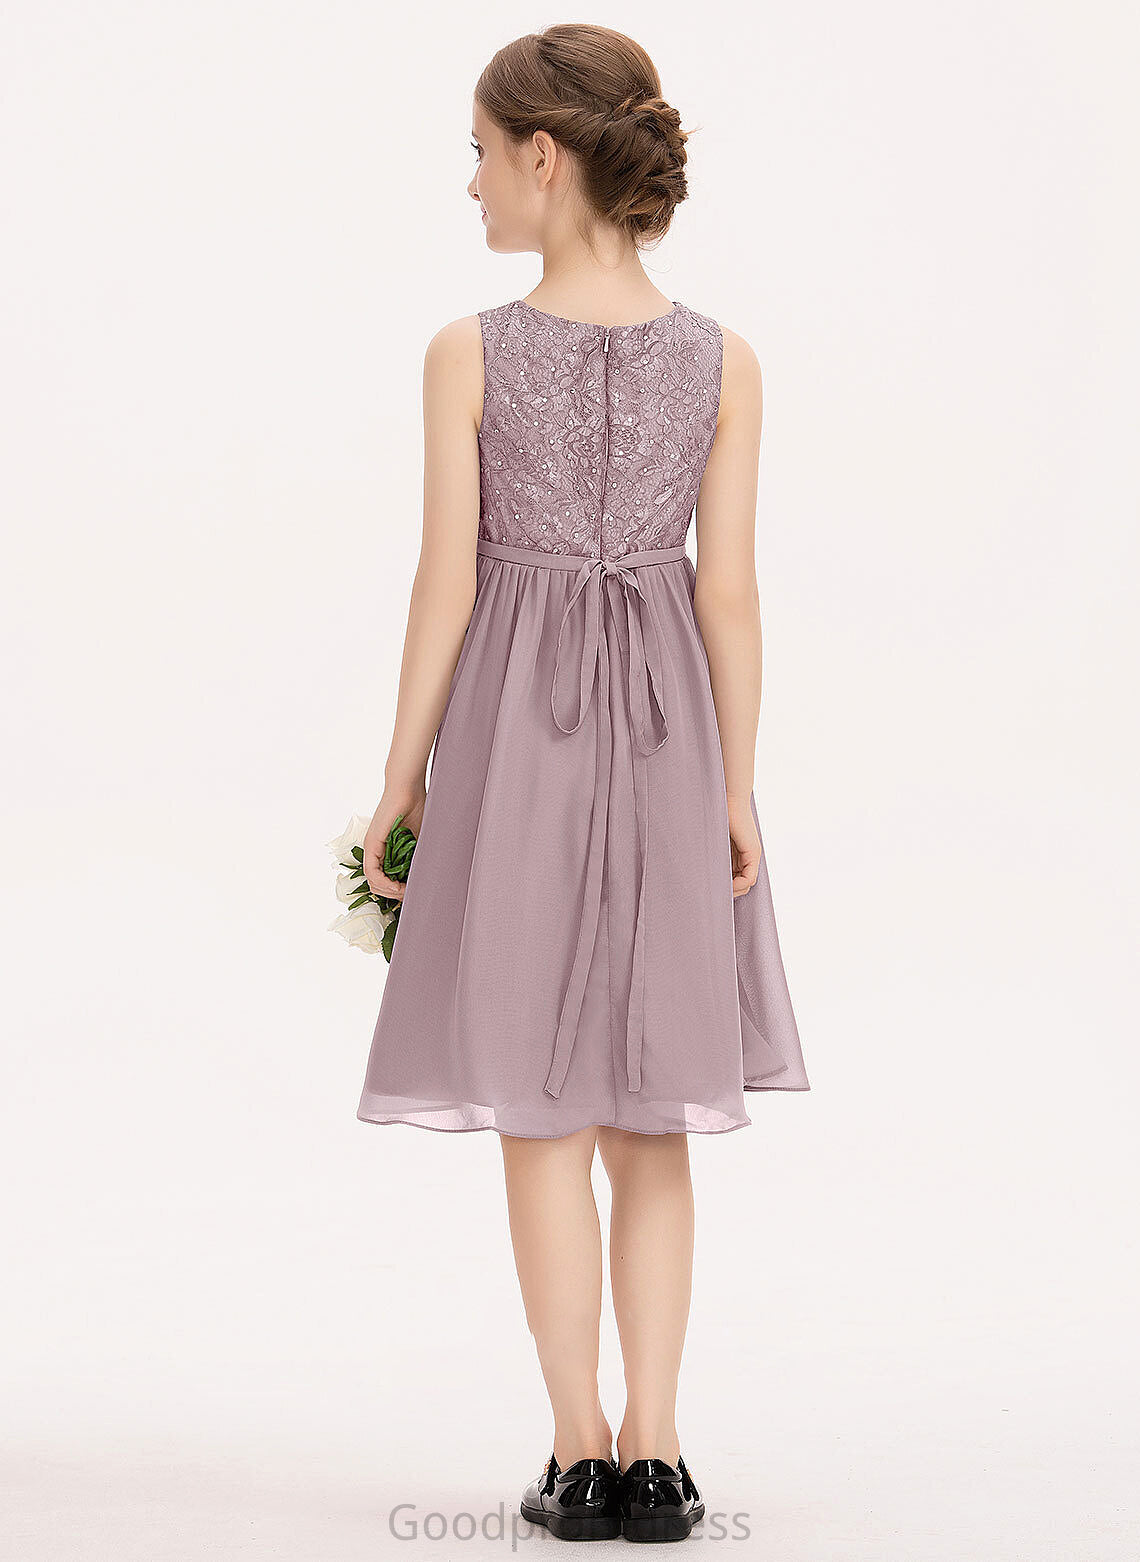 Bow(s) Nayeli Beading A-Line With Chiffon Neck Scoop Knee-Length Junior Bridesmaid Dresses Lace